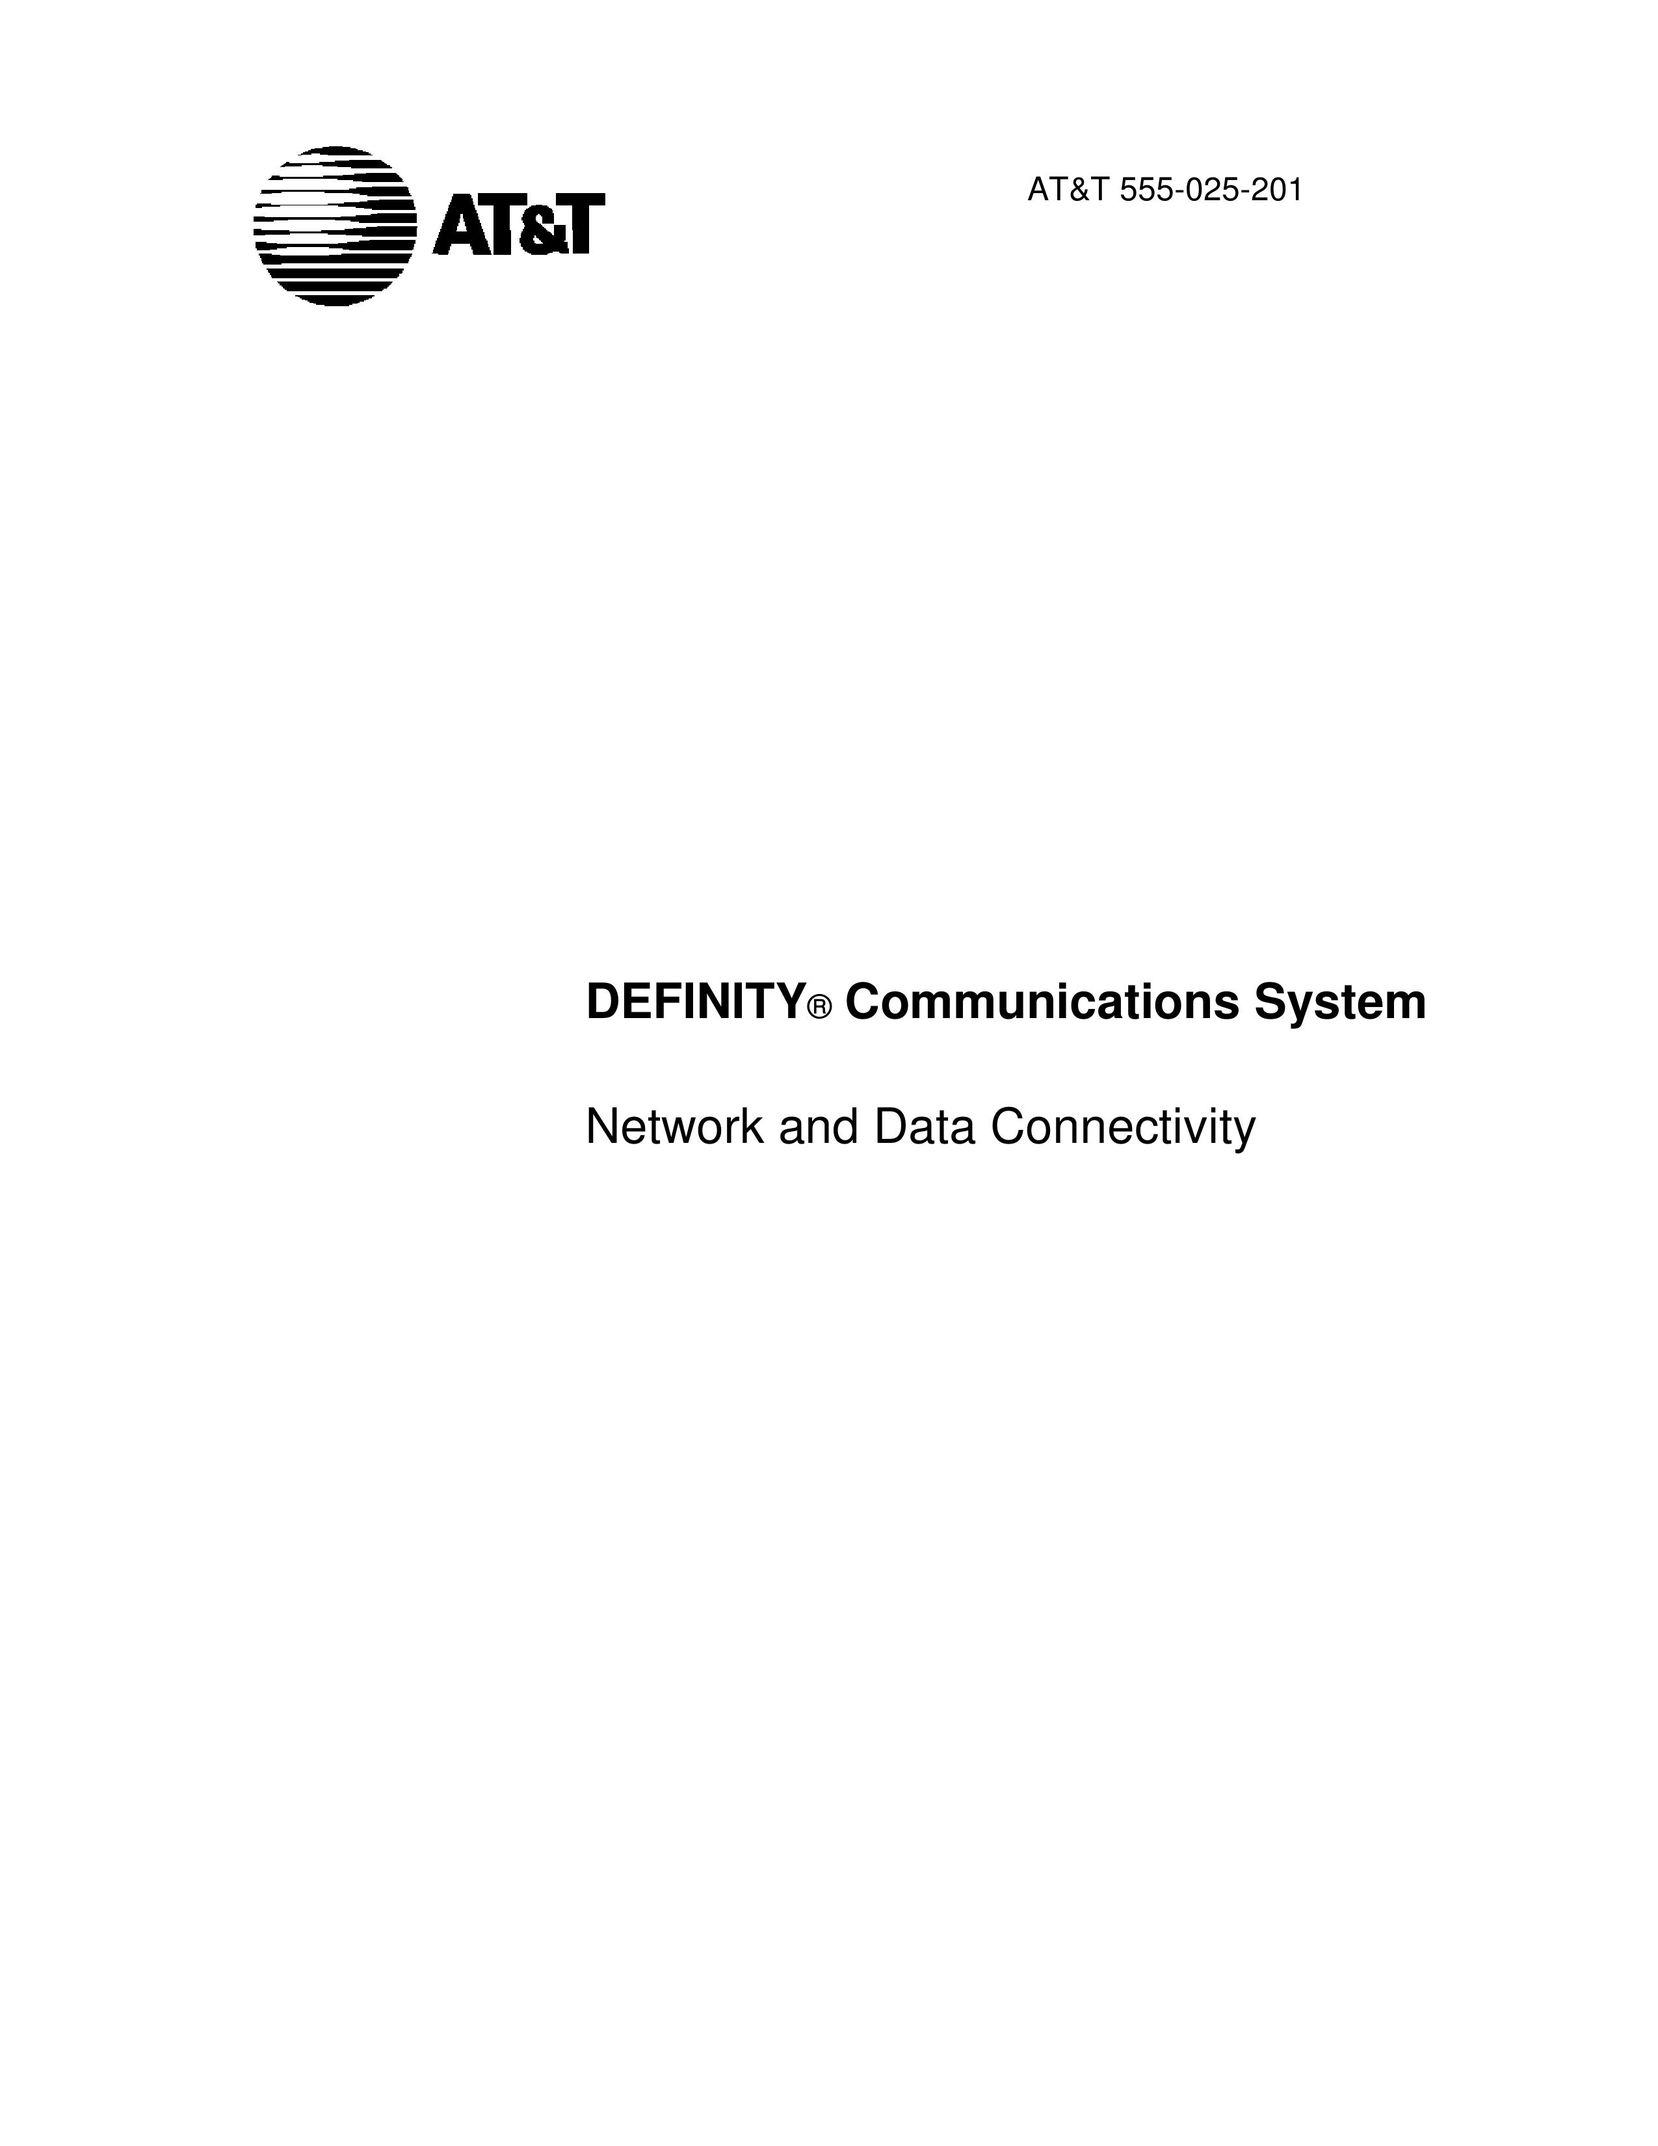 AT&T 7500 series Network Router User Manual